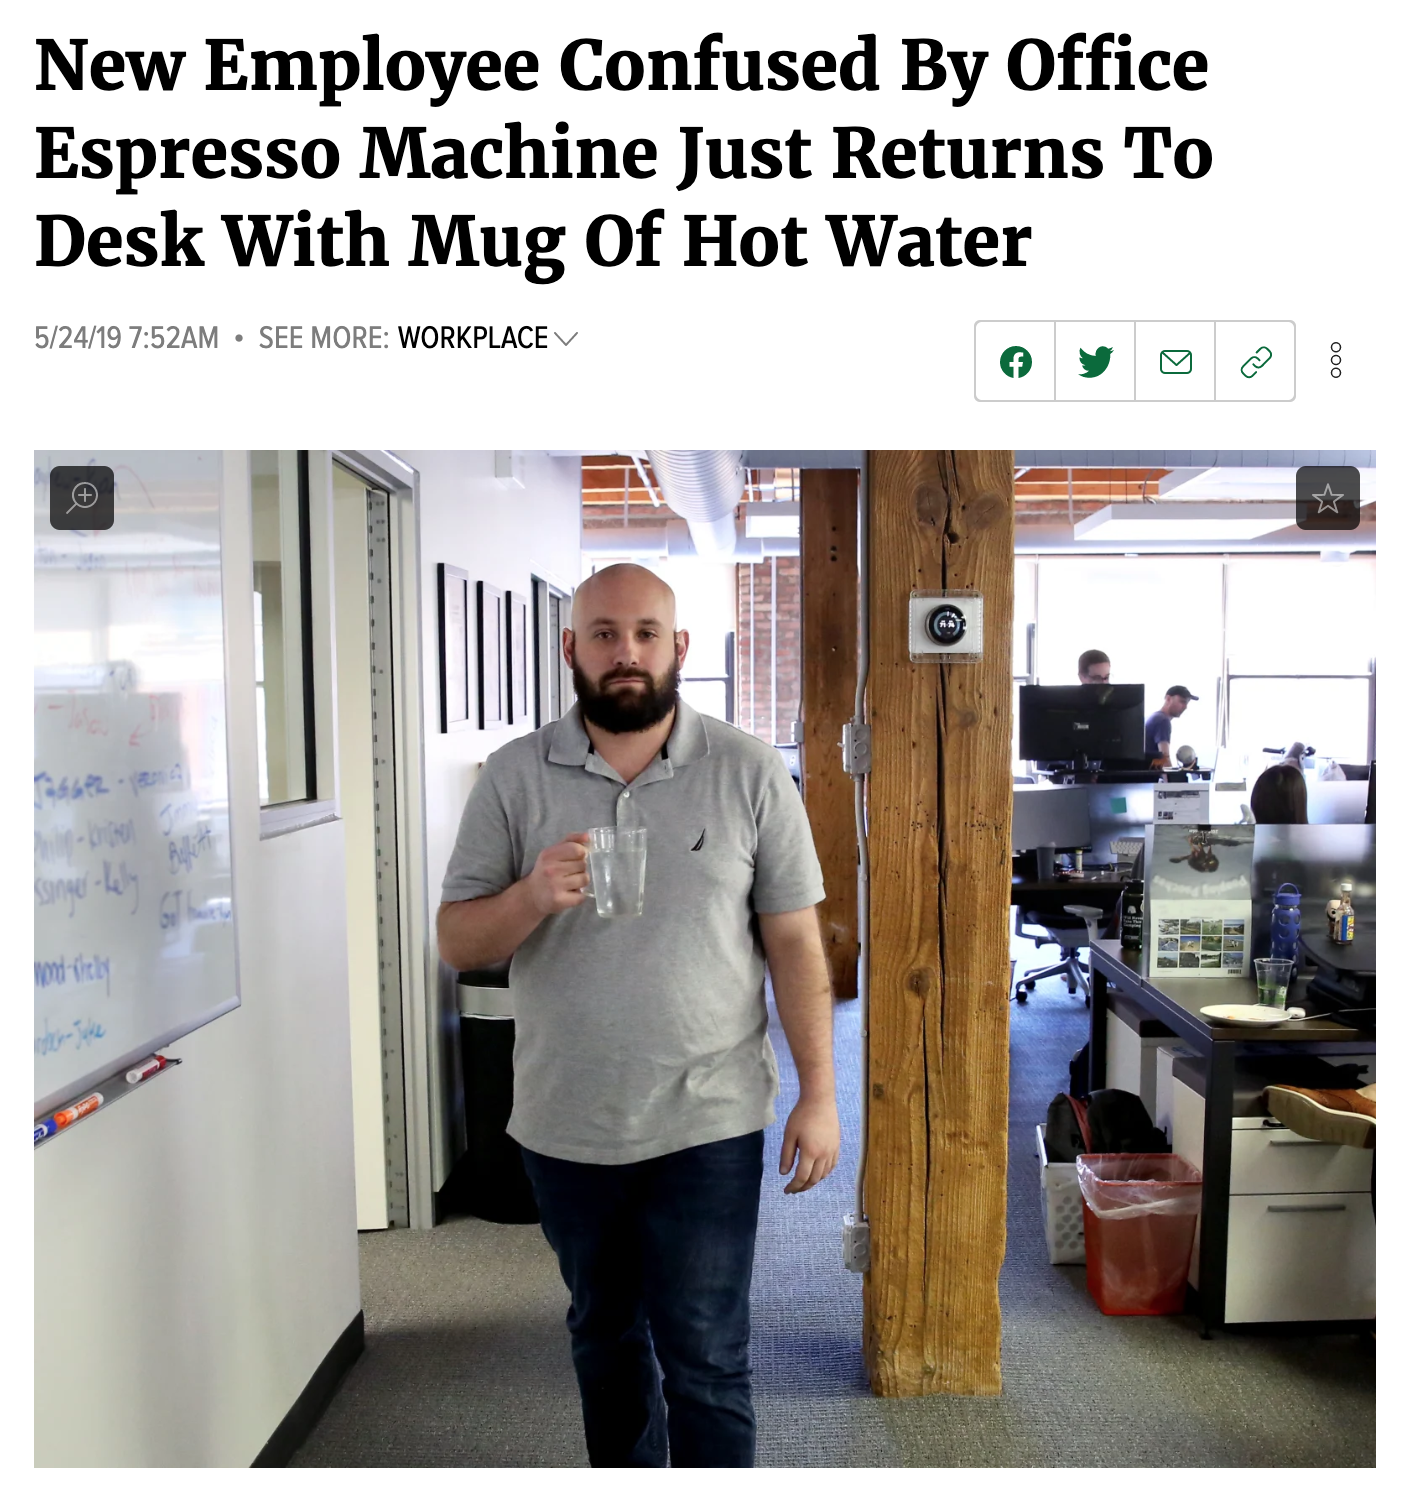 An article about a man confused by an expresso machine.